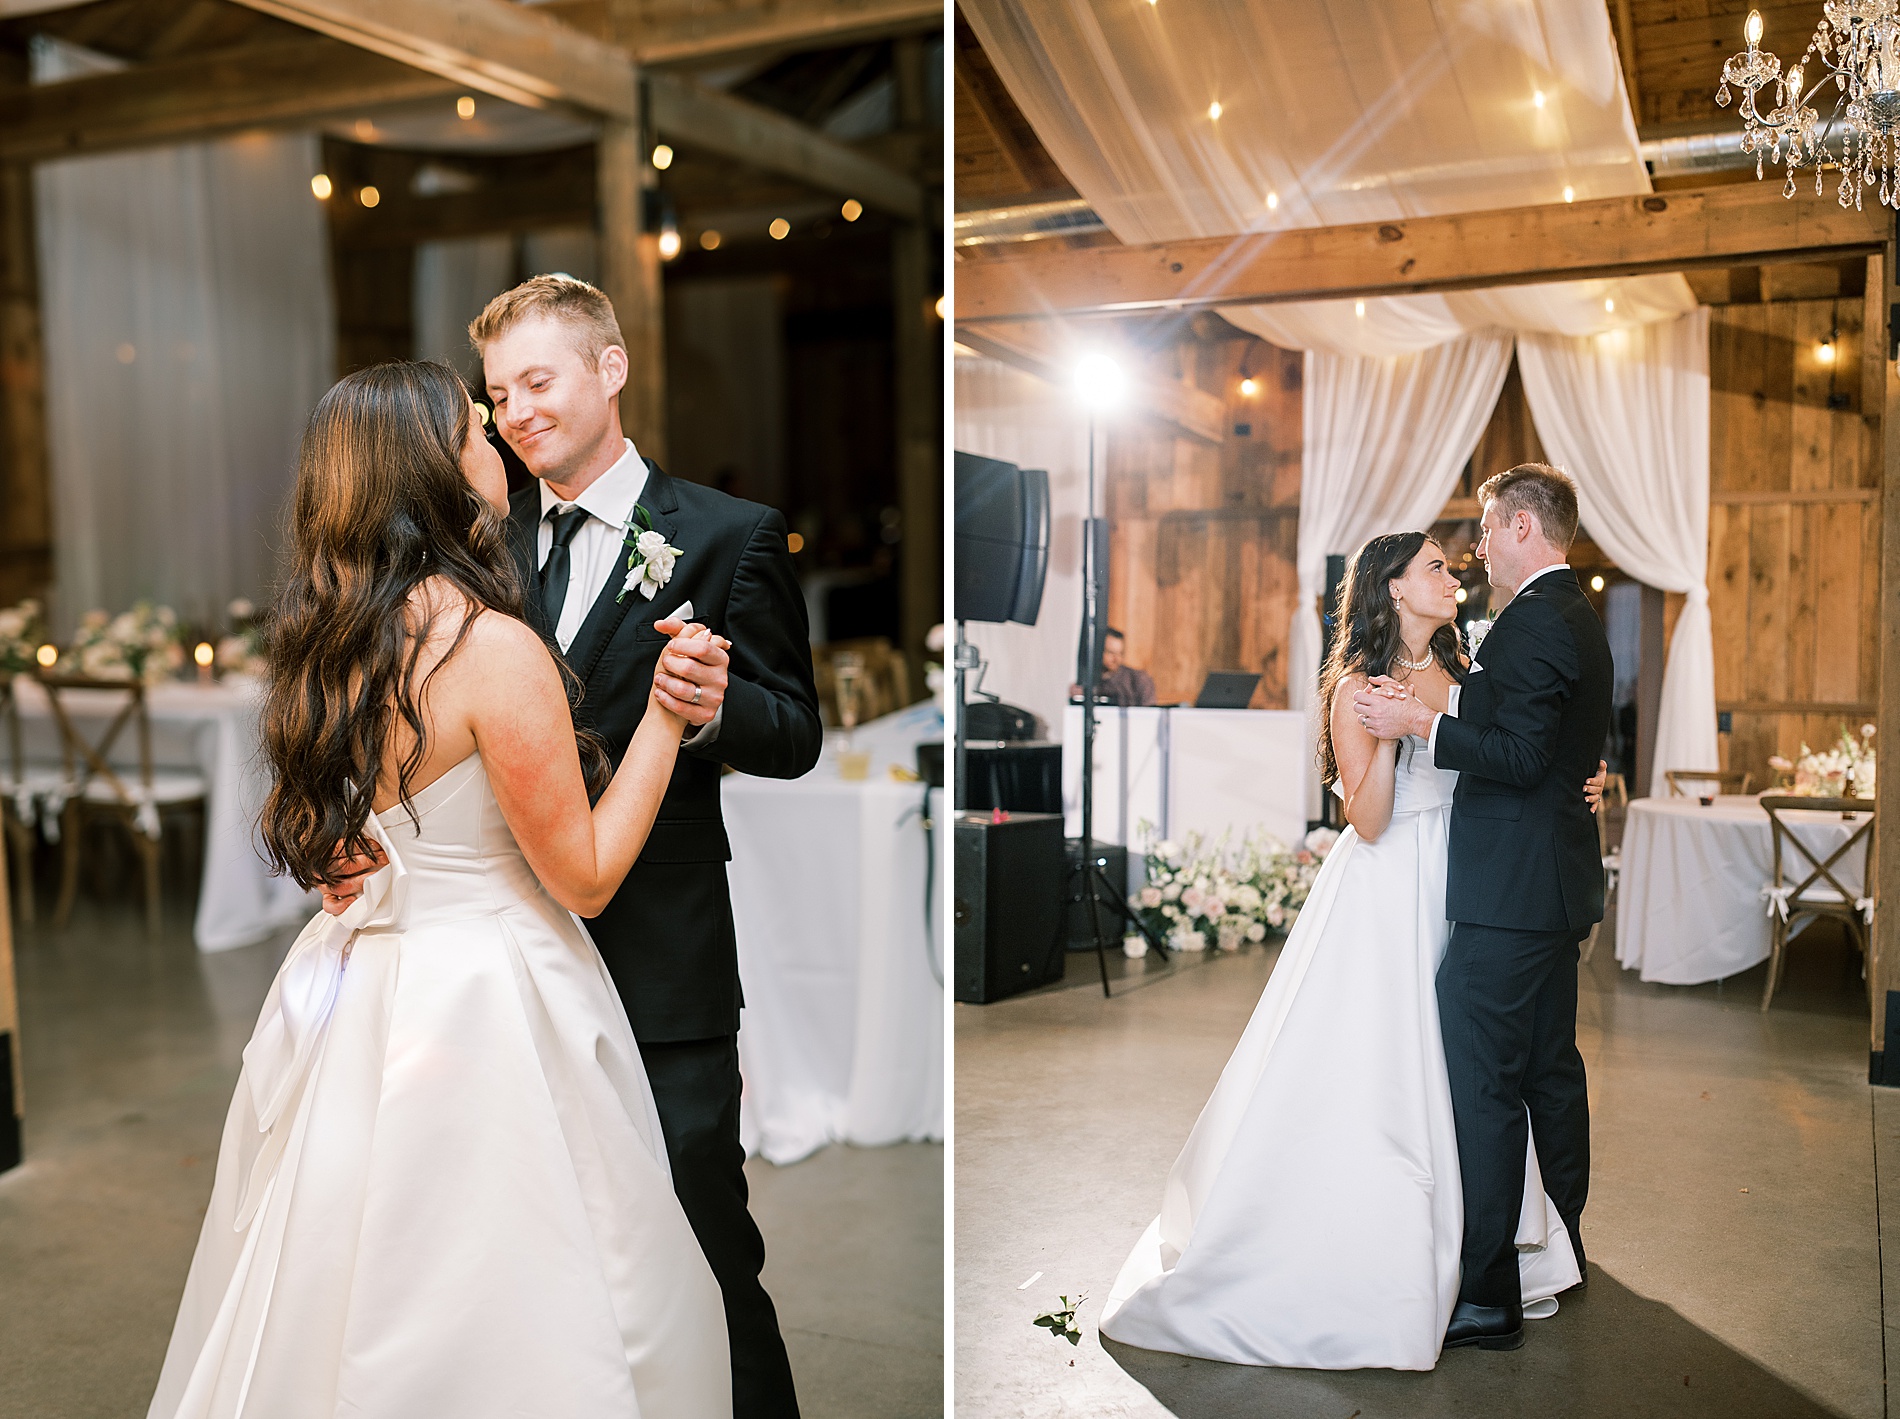 newlyweds enjoy private last dance at the end of reception